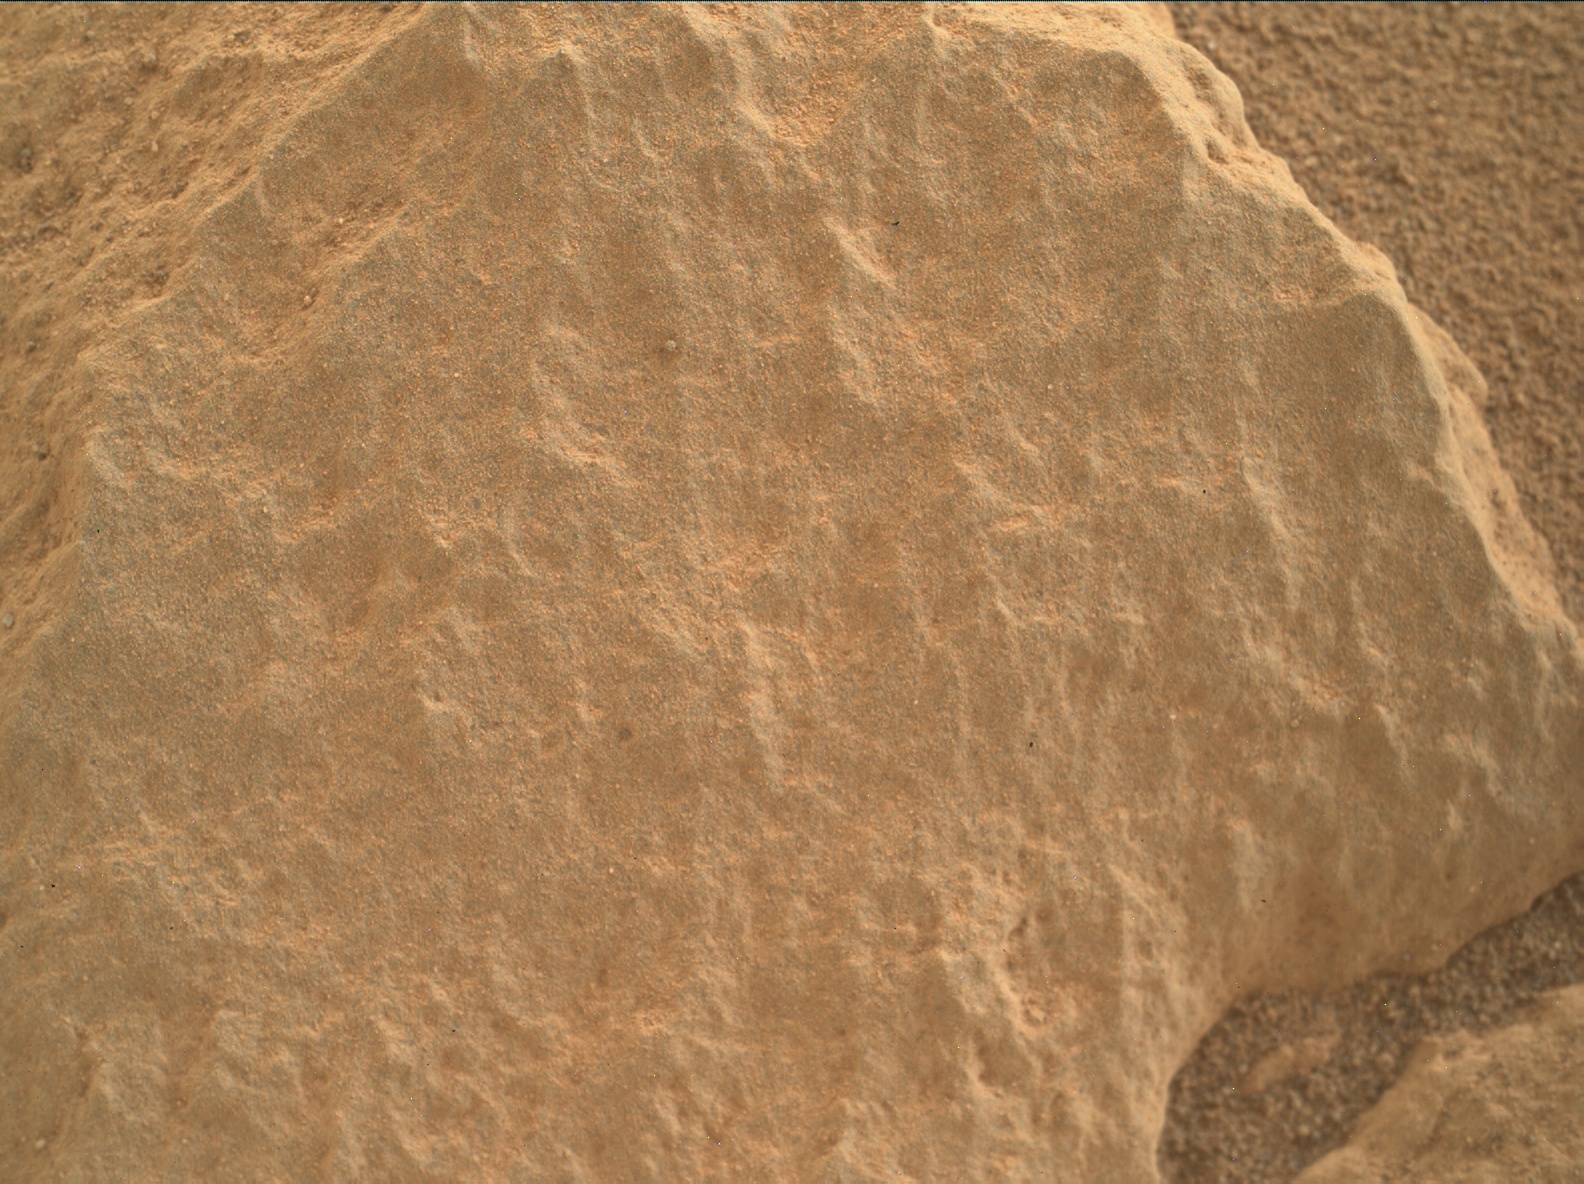 Nasa's Mars rover Curiosity acquired this image using its Mars Hand Lens Imager (MAHLI) on Sol 3423